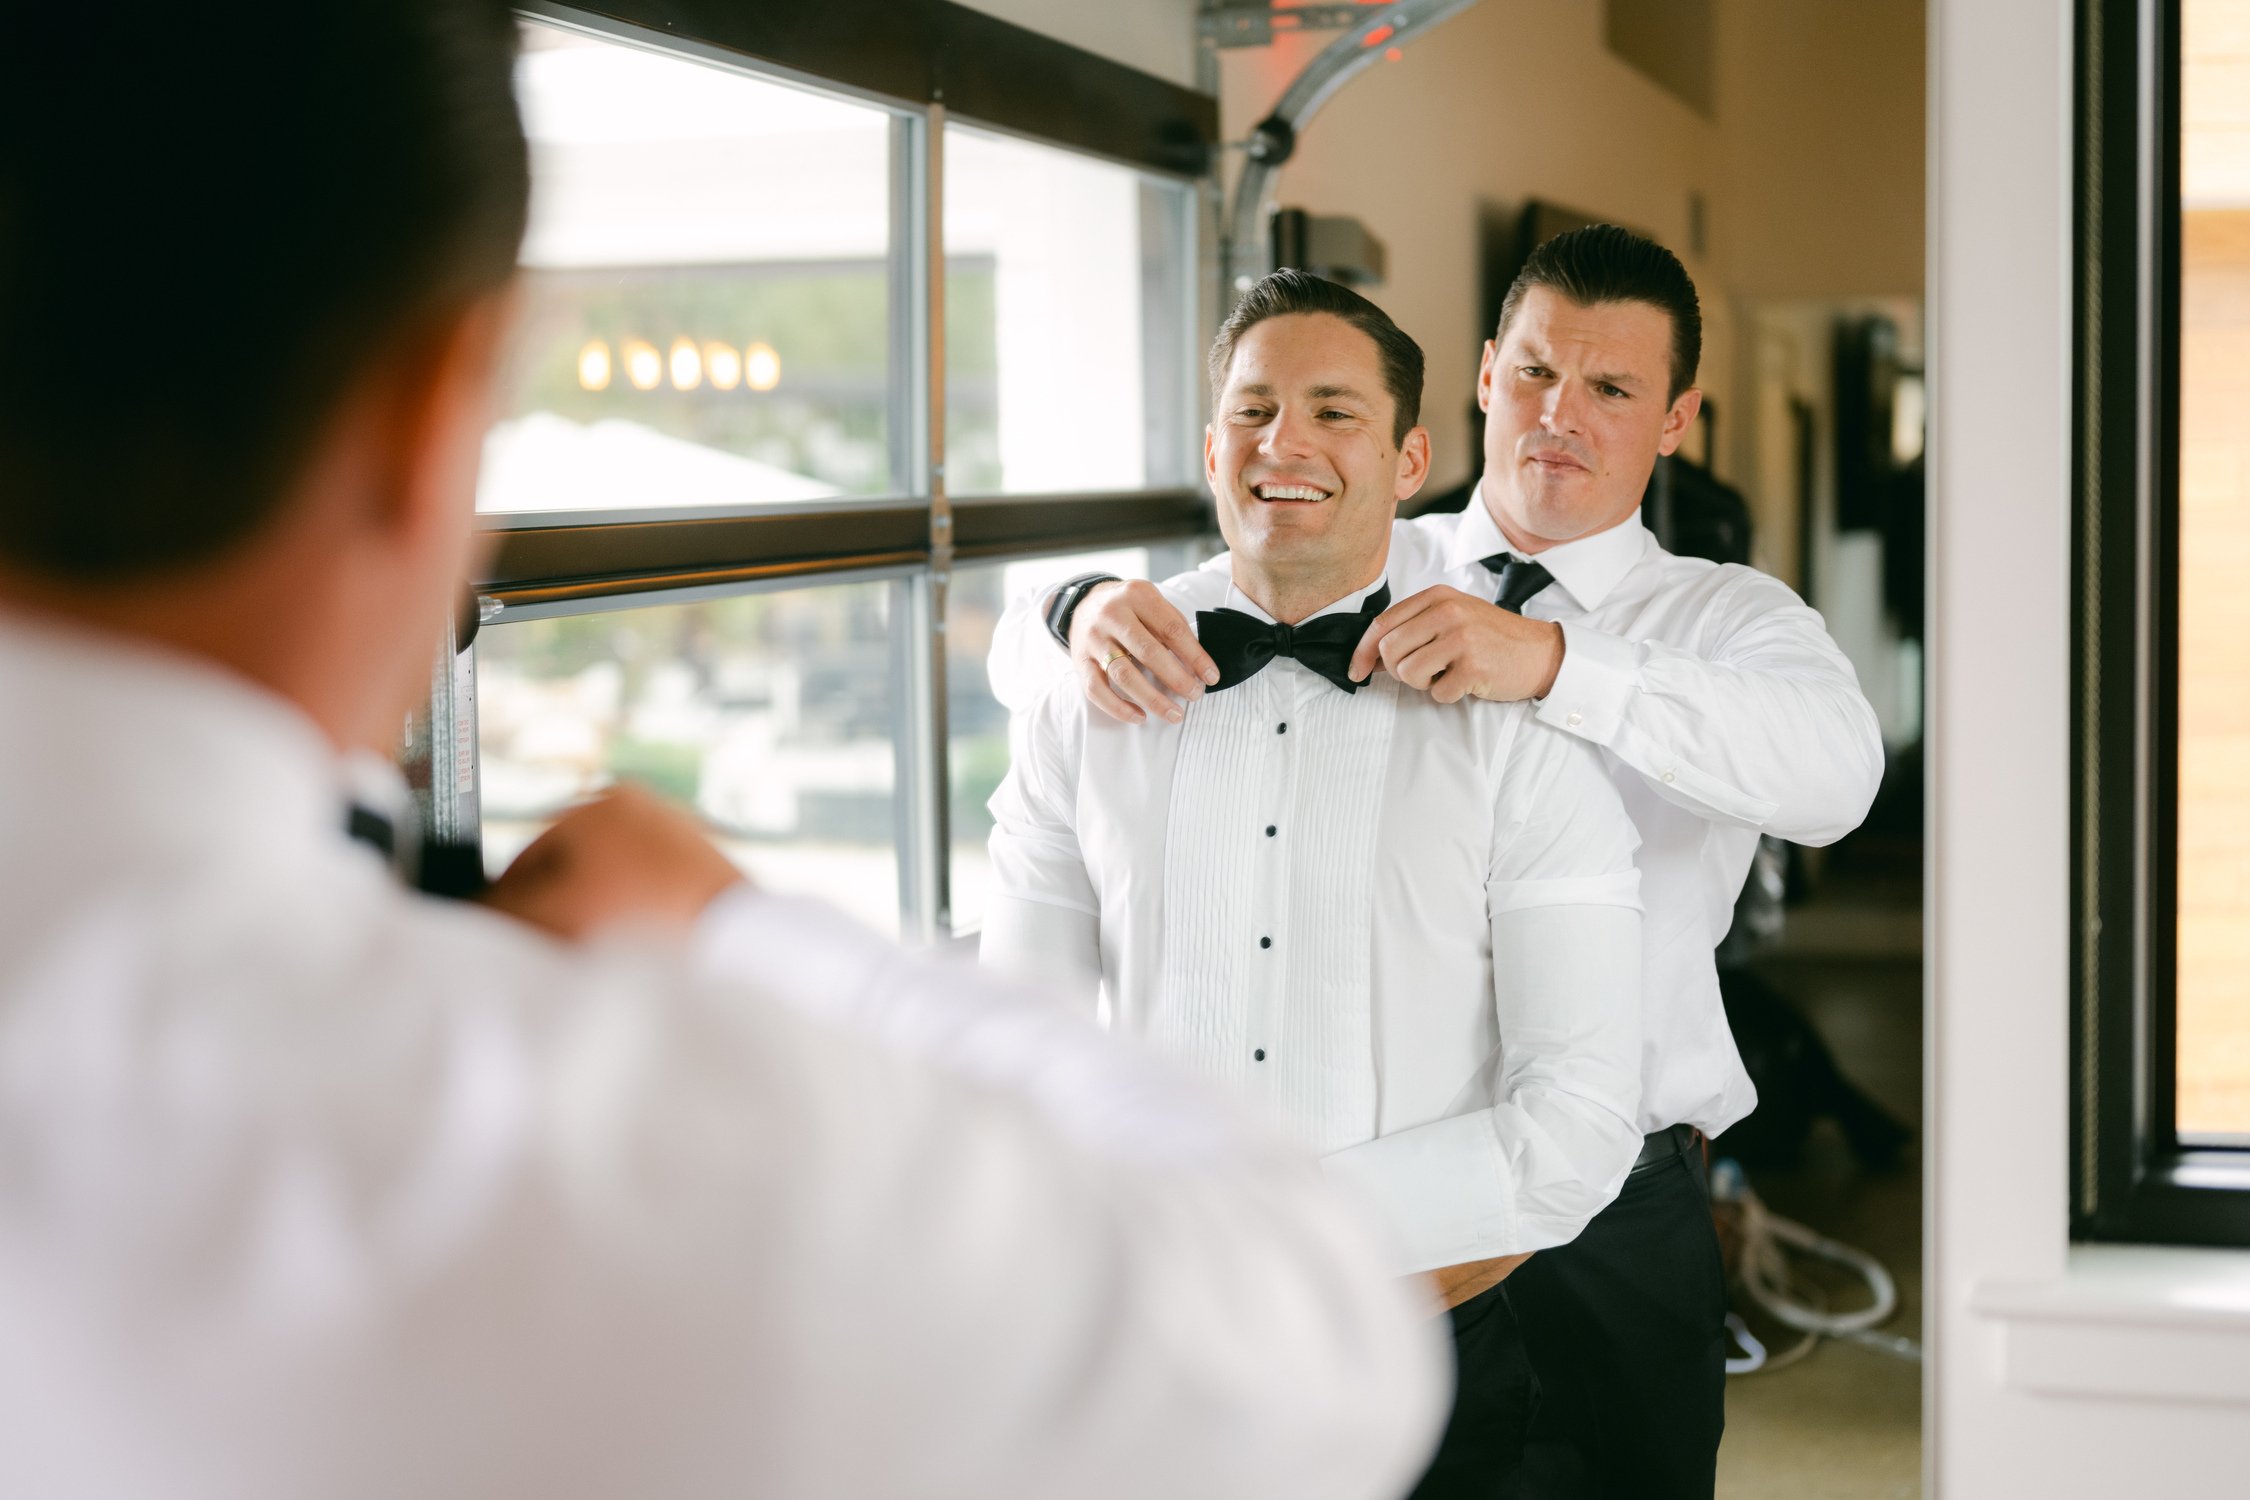 Elm Estate Wedding photos, photo of the best man fixing the groom’s bow tie for his wedding day